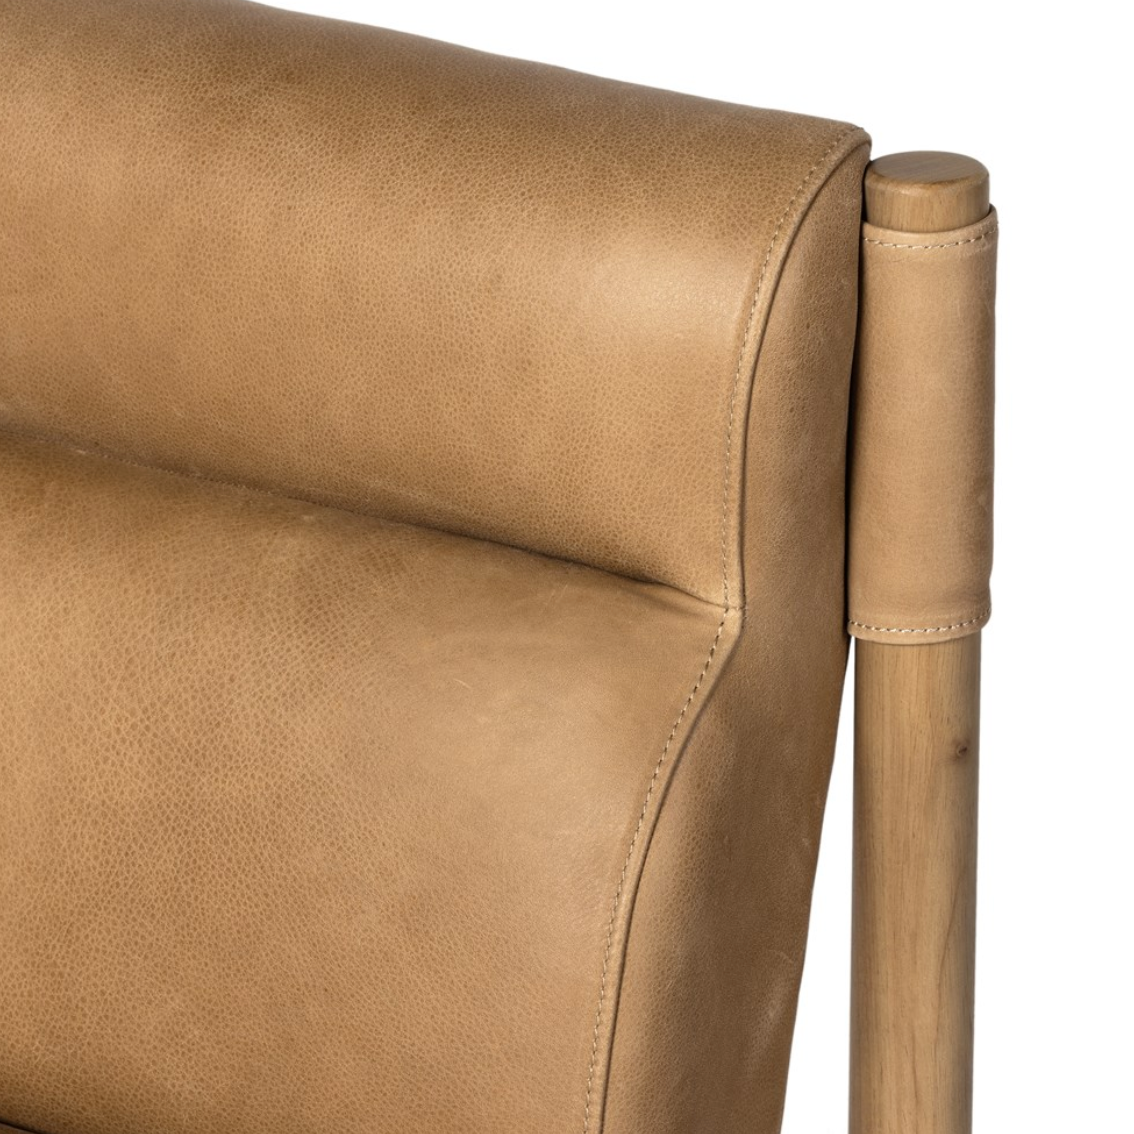 Kiano Palermo Top Grain Leather Dining Chair